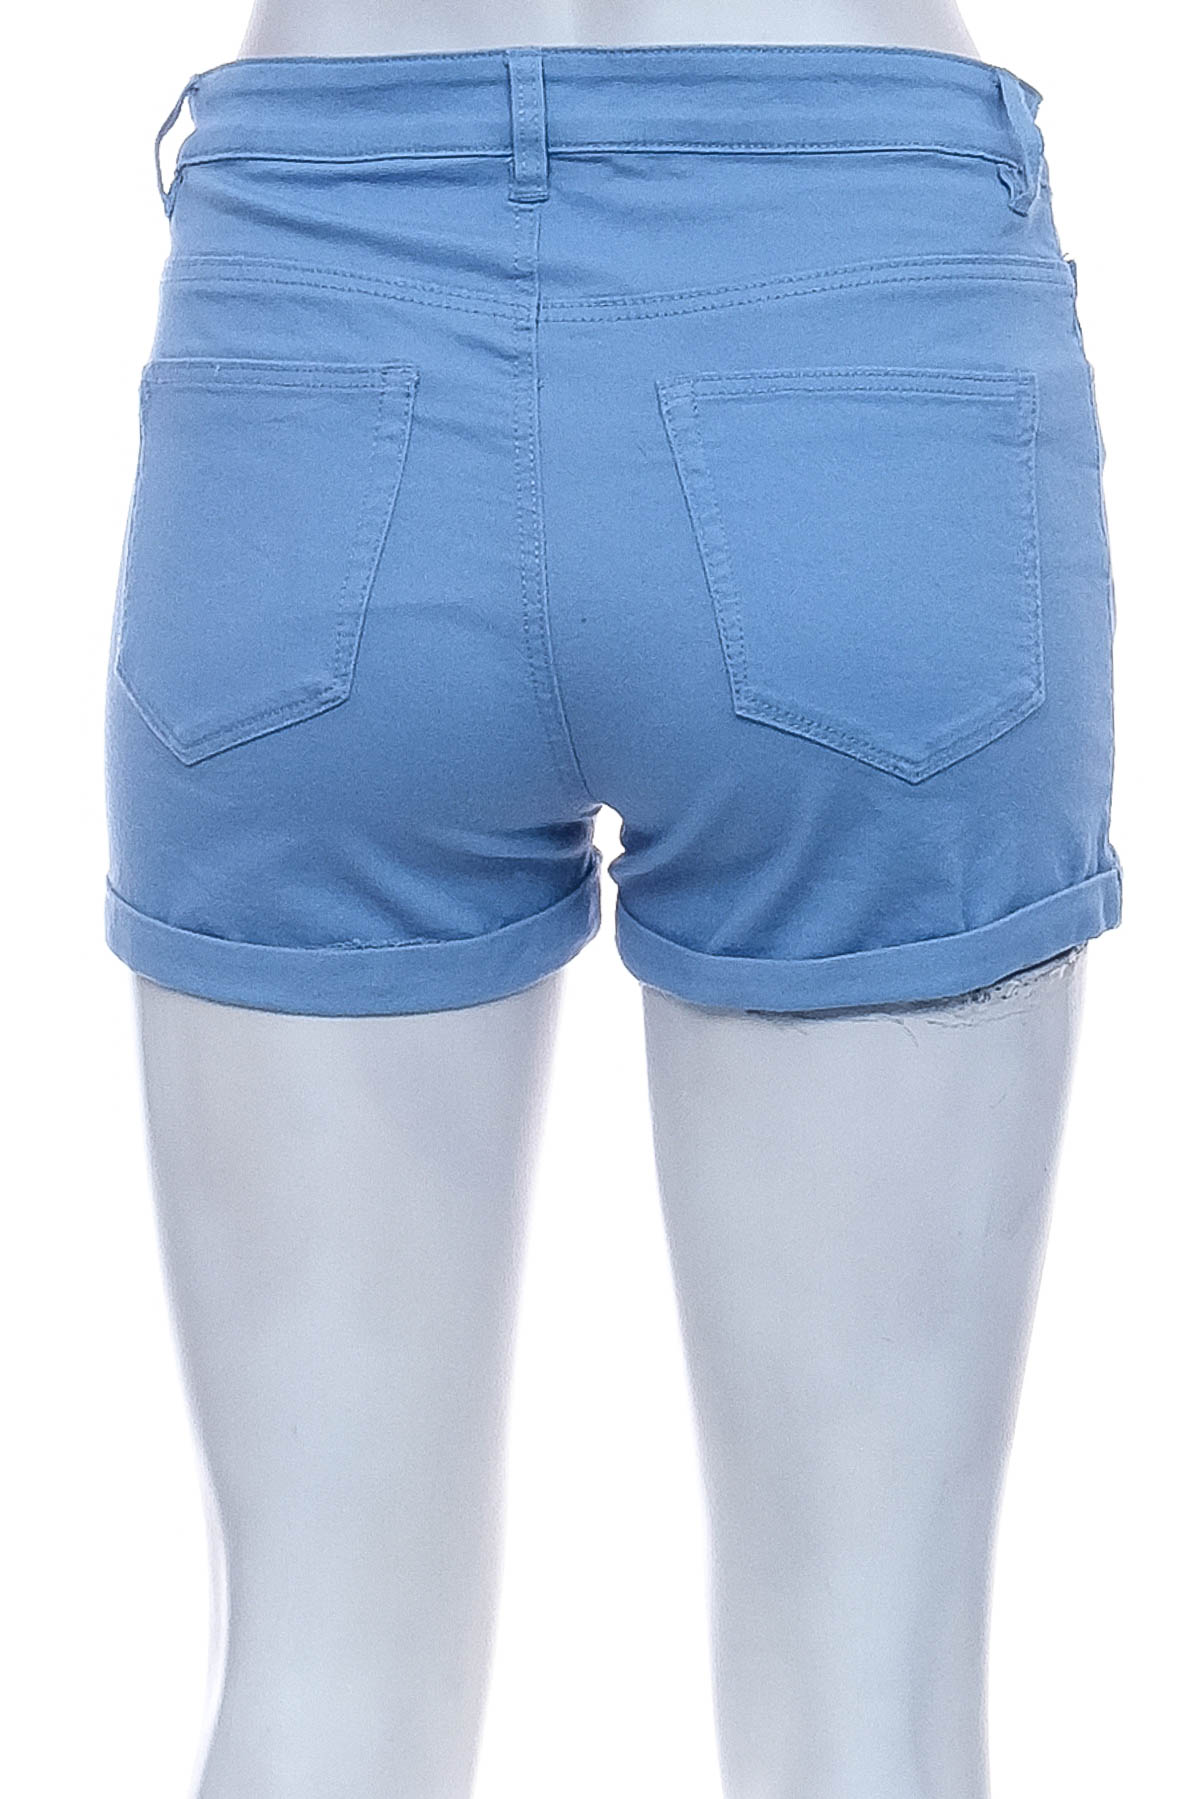 Shorts for girls - H&M - 1